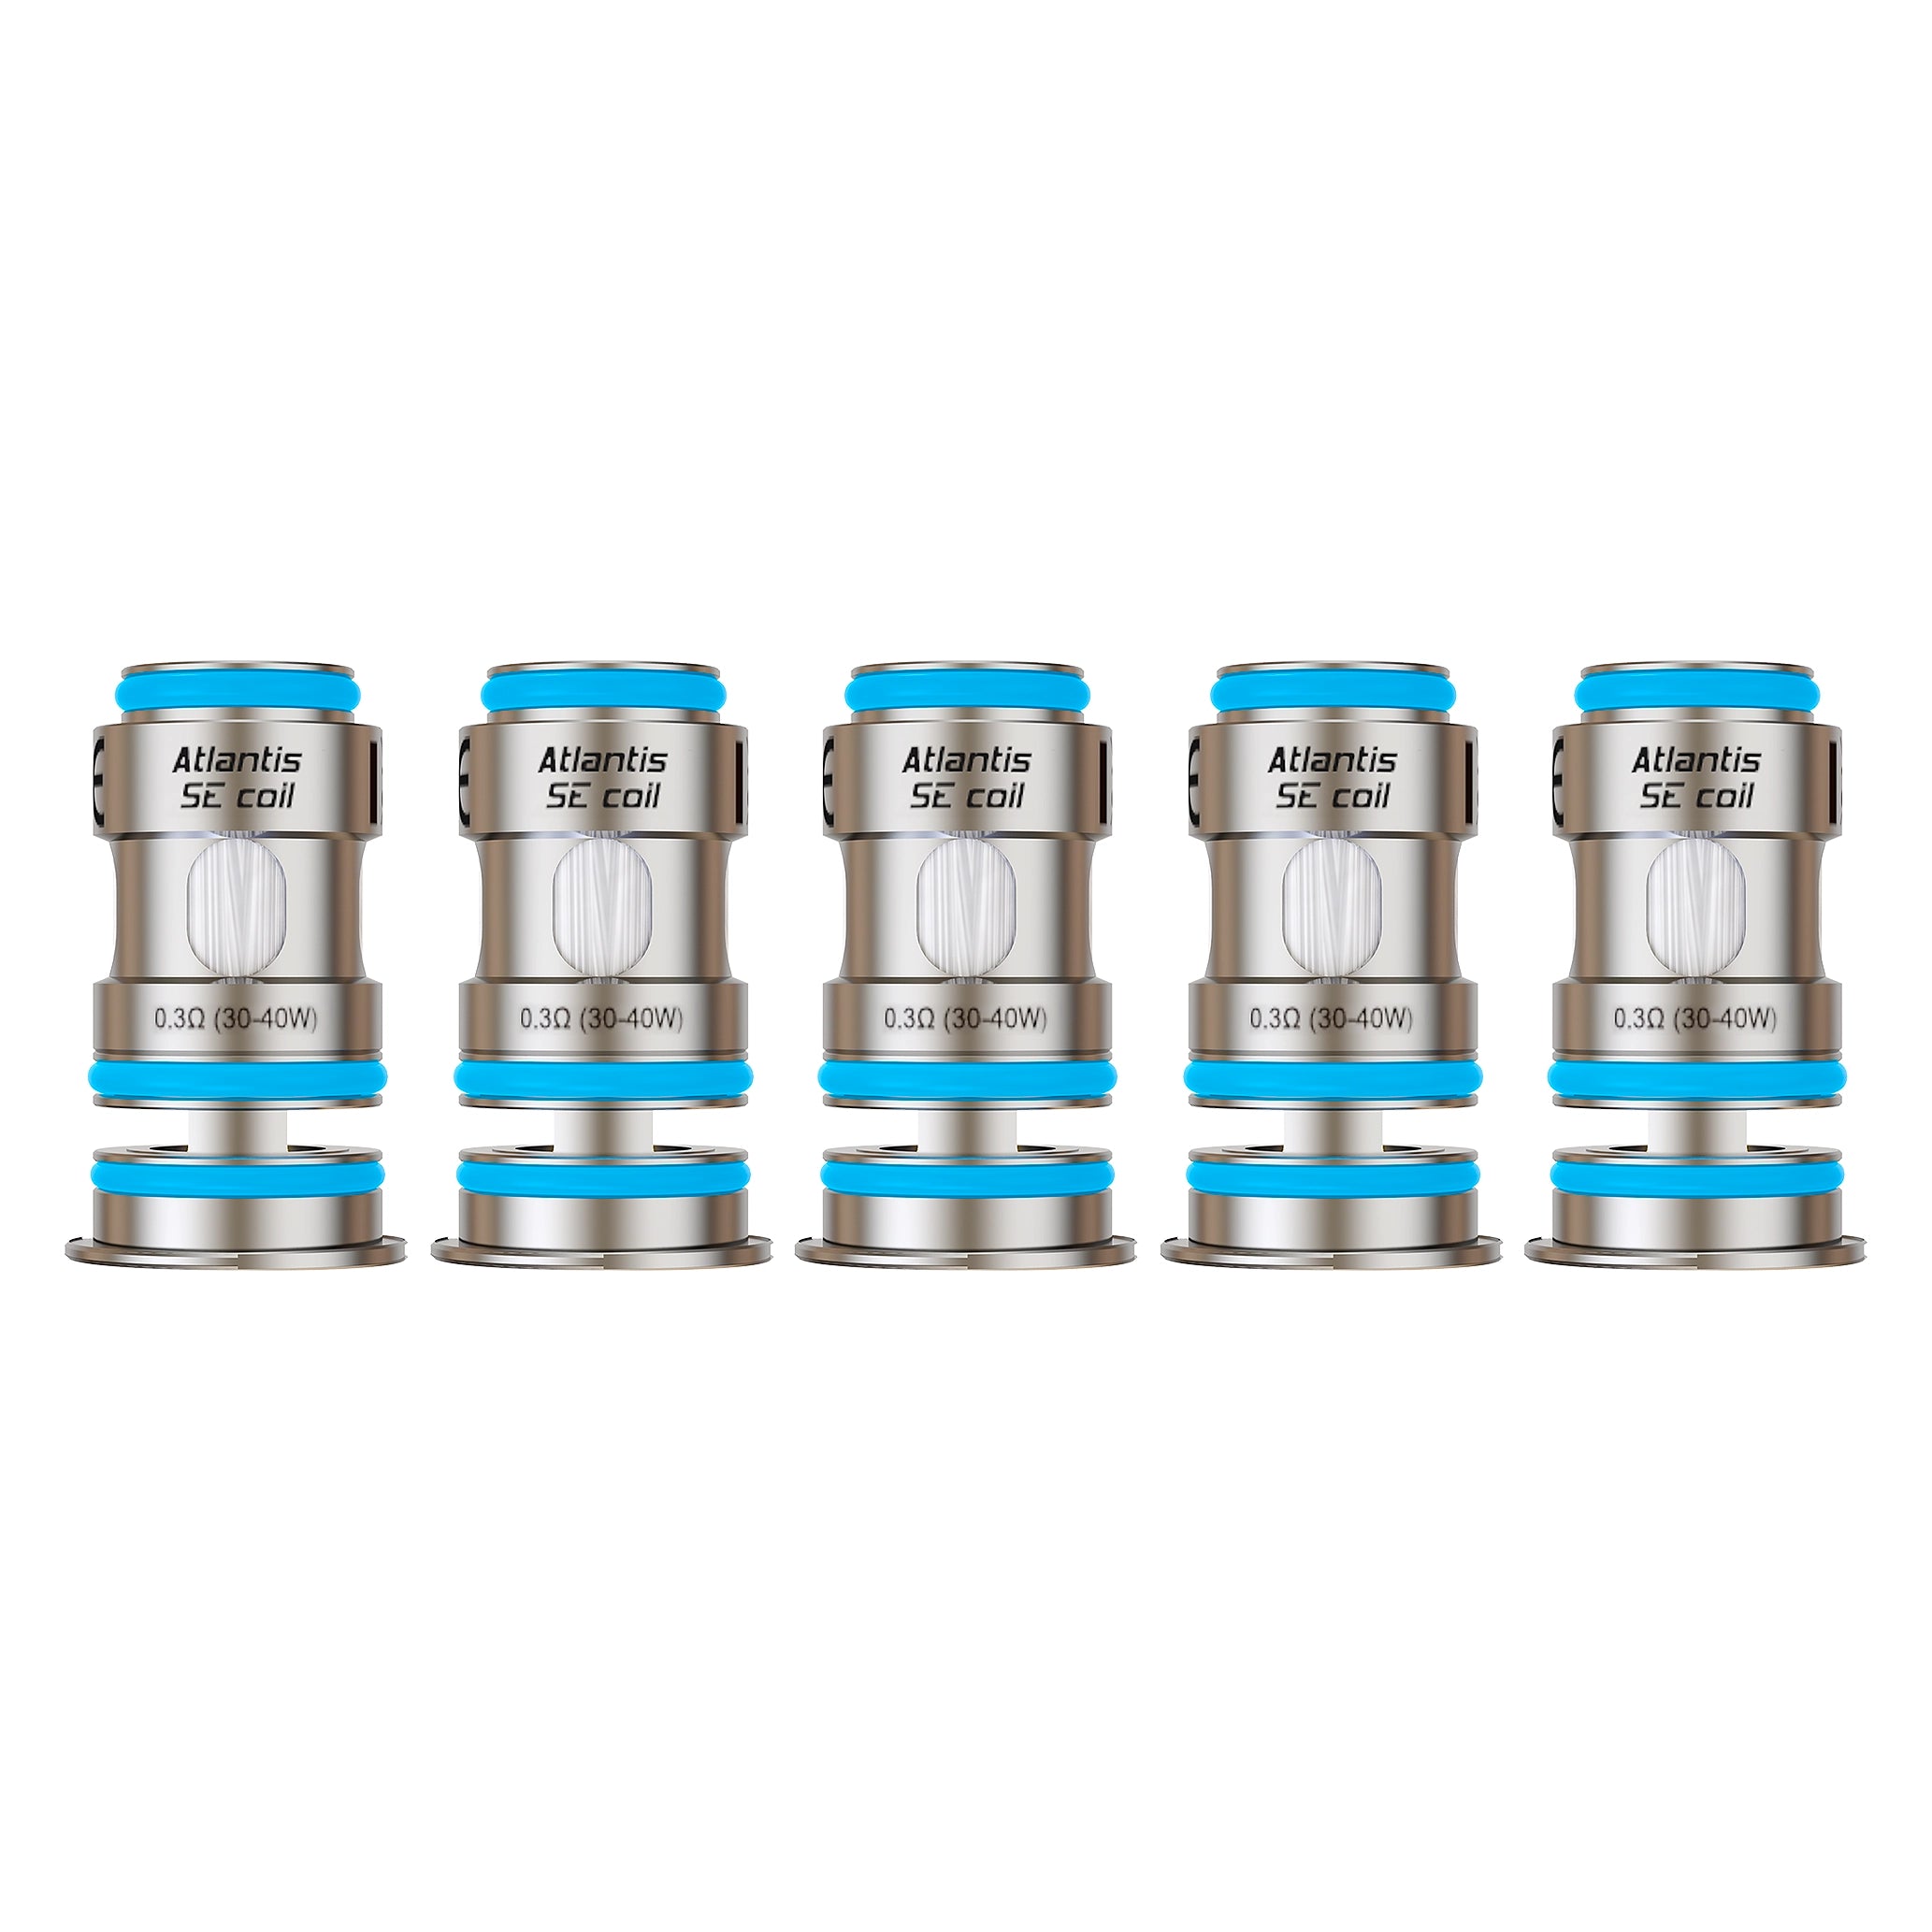 Aspire's Atlantis SE coils are designed for use with the Atlantis GT Tank only. There are 3 versions of this coil available, to support Direct To Lung vaping.Aspire's Atlantis SE coils are designed for use with the Atlantis GT Tank only. There are 3 versions of this coil available, to support Direct To Lung vaping.